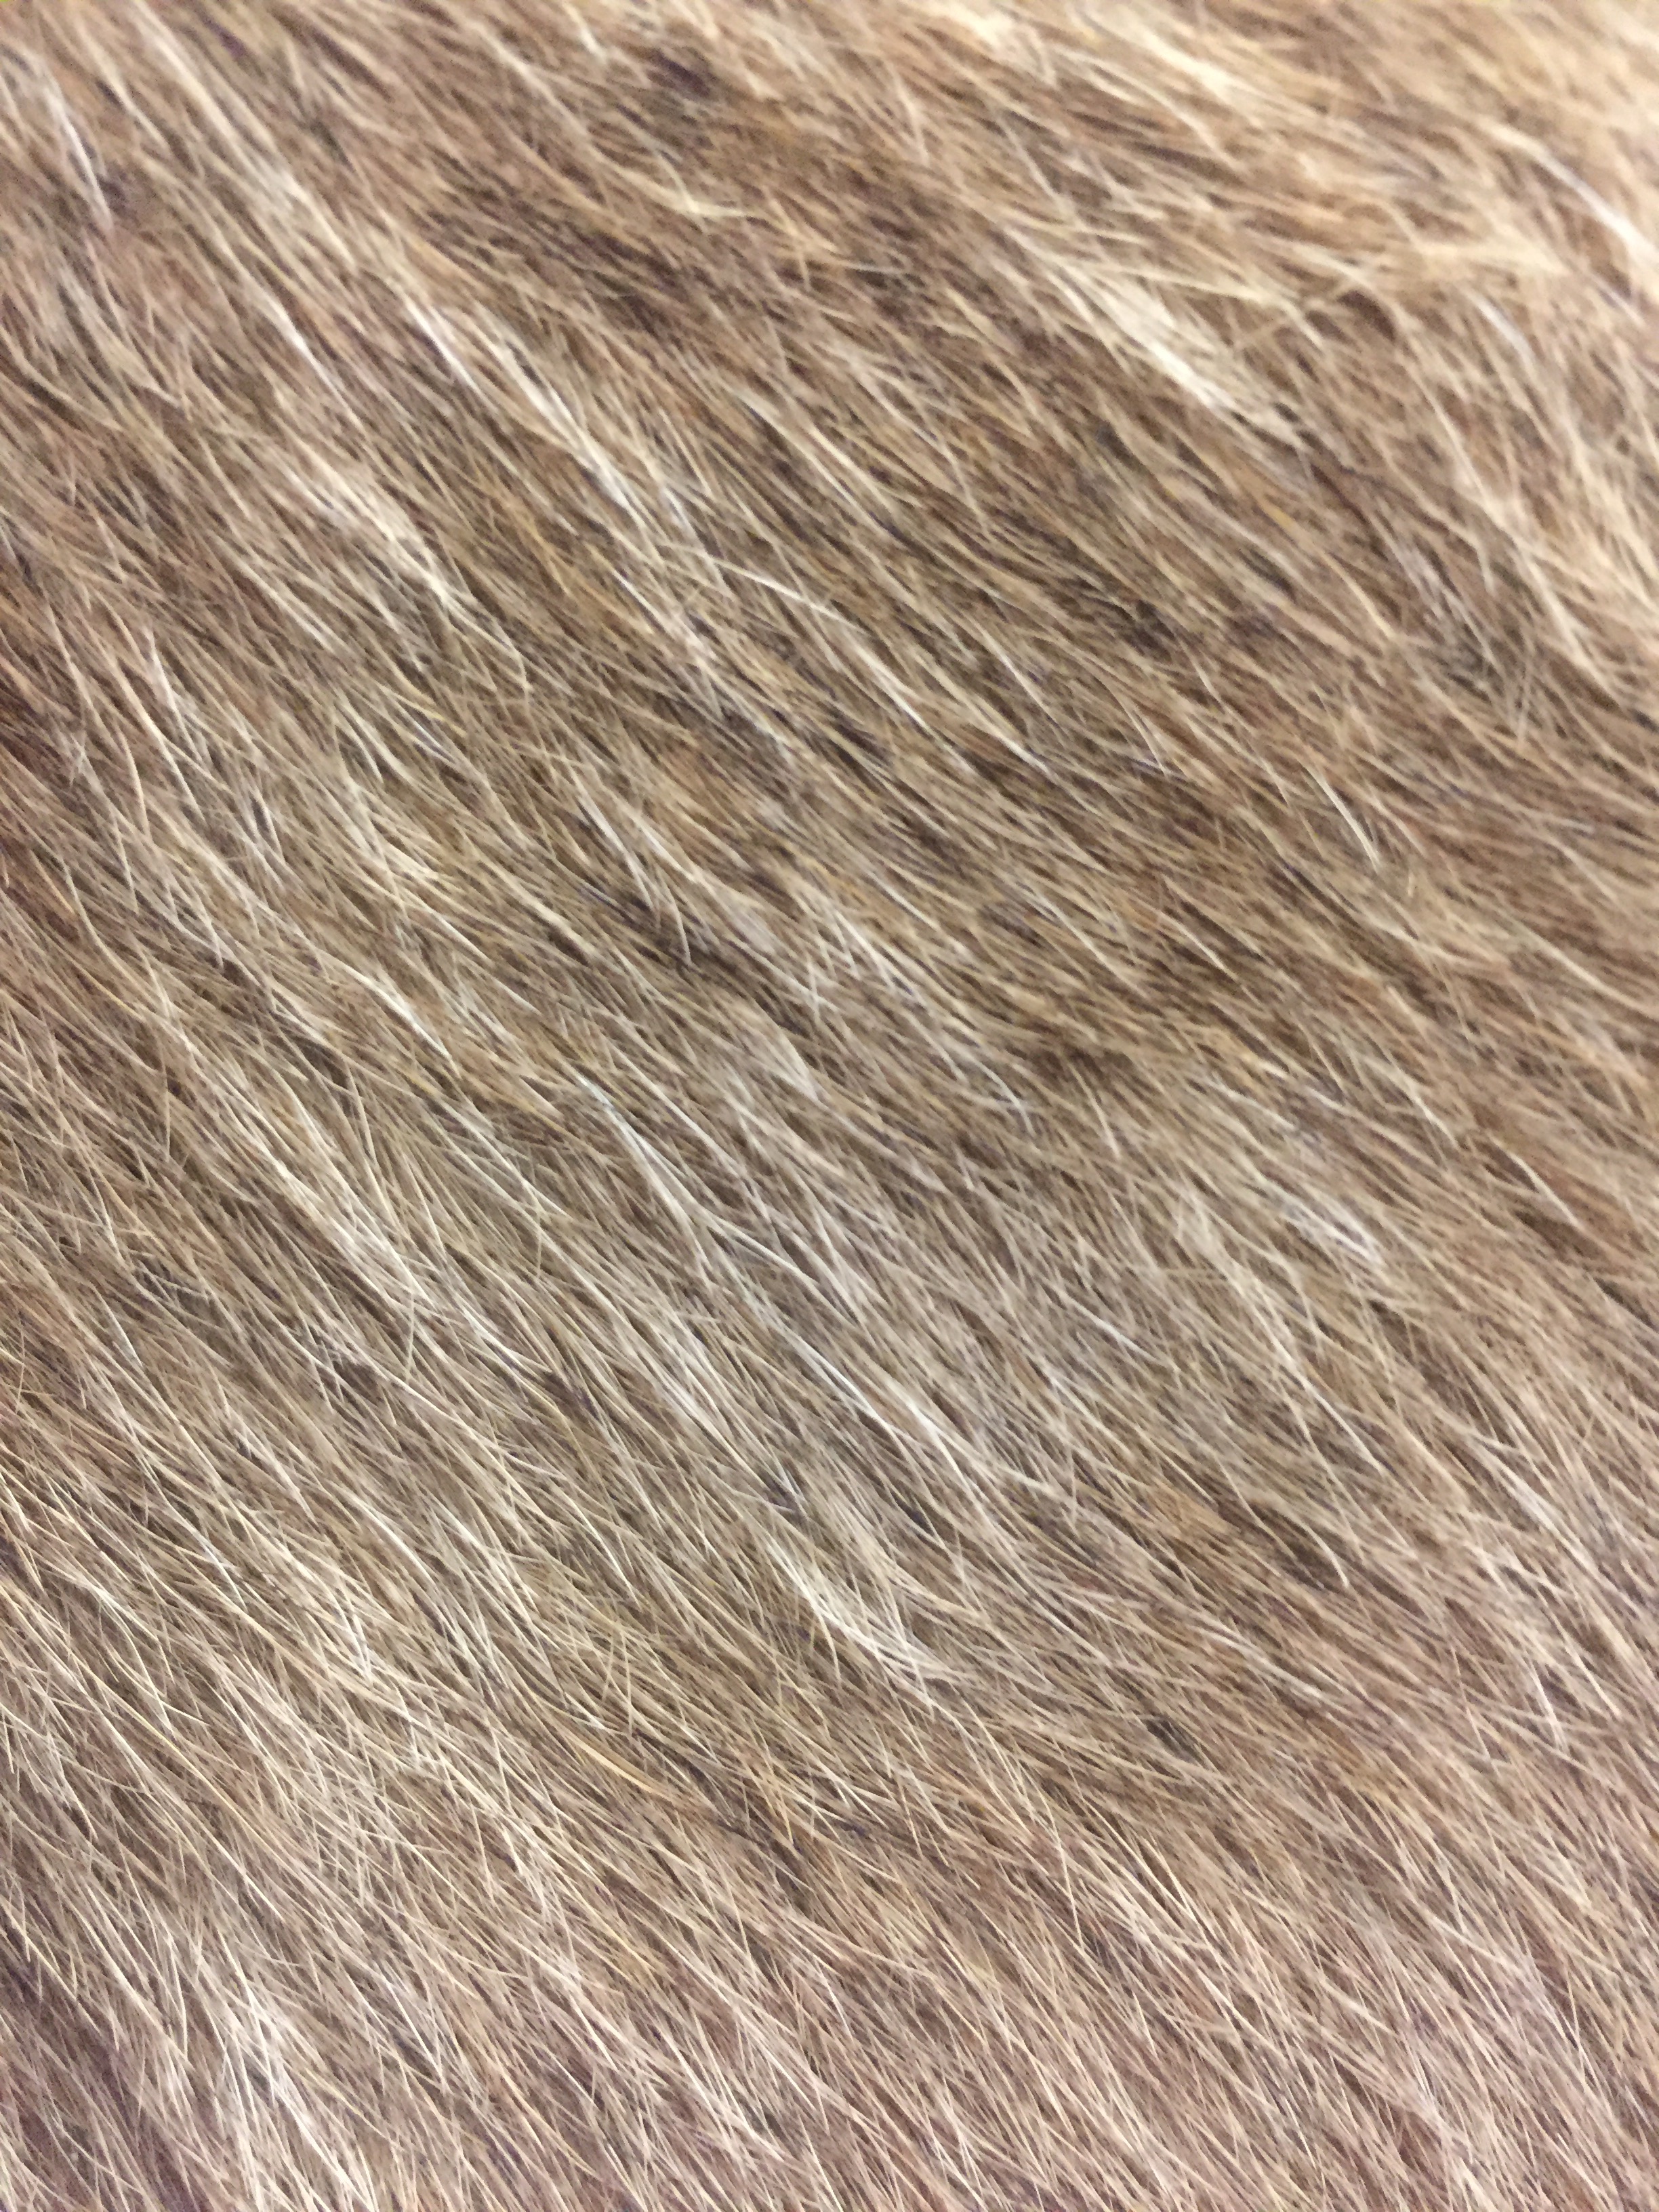 Hairy animal skin texture Fabric | Free Textures